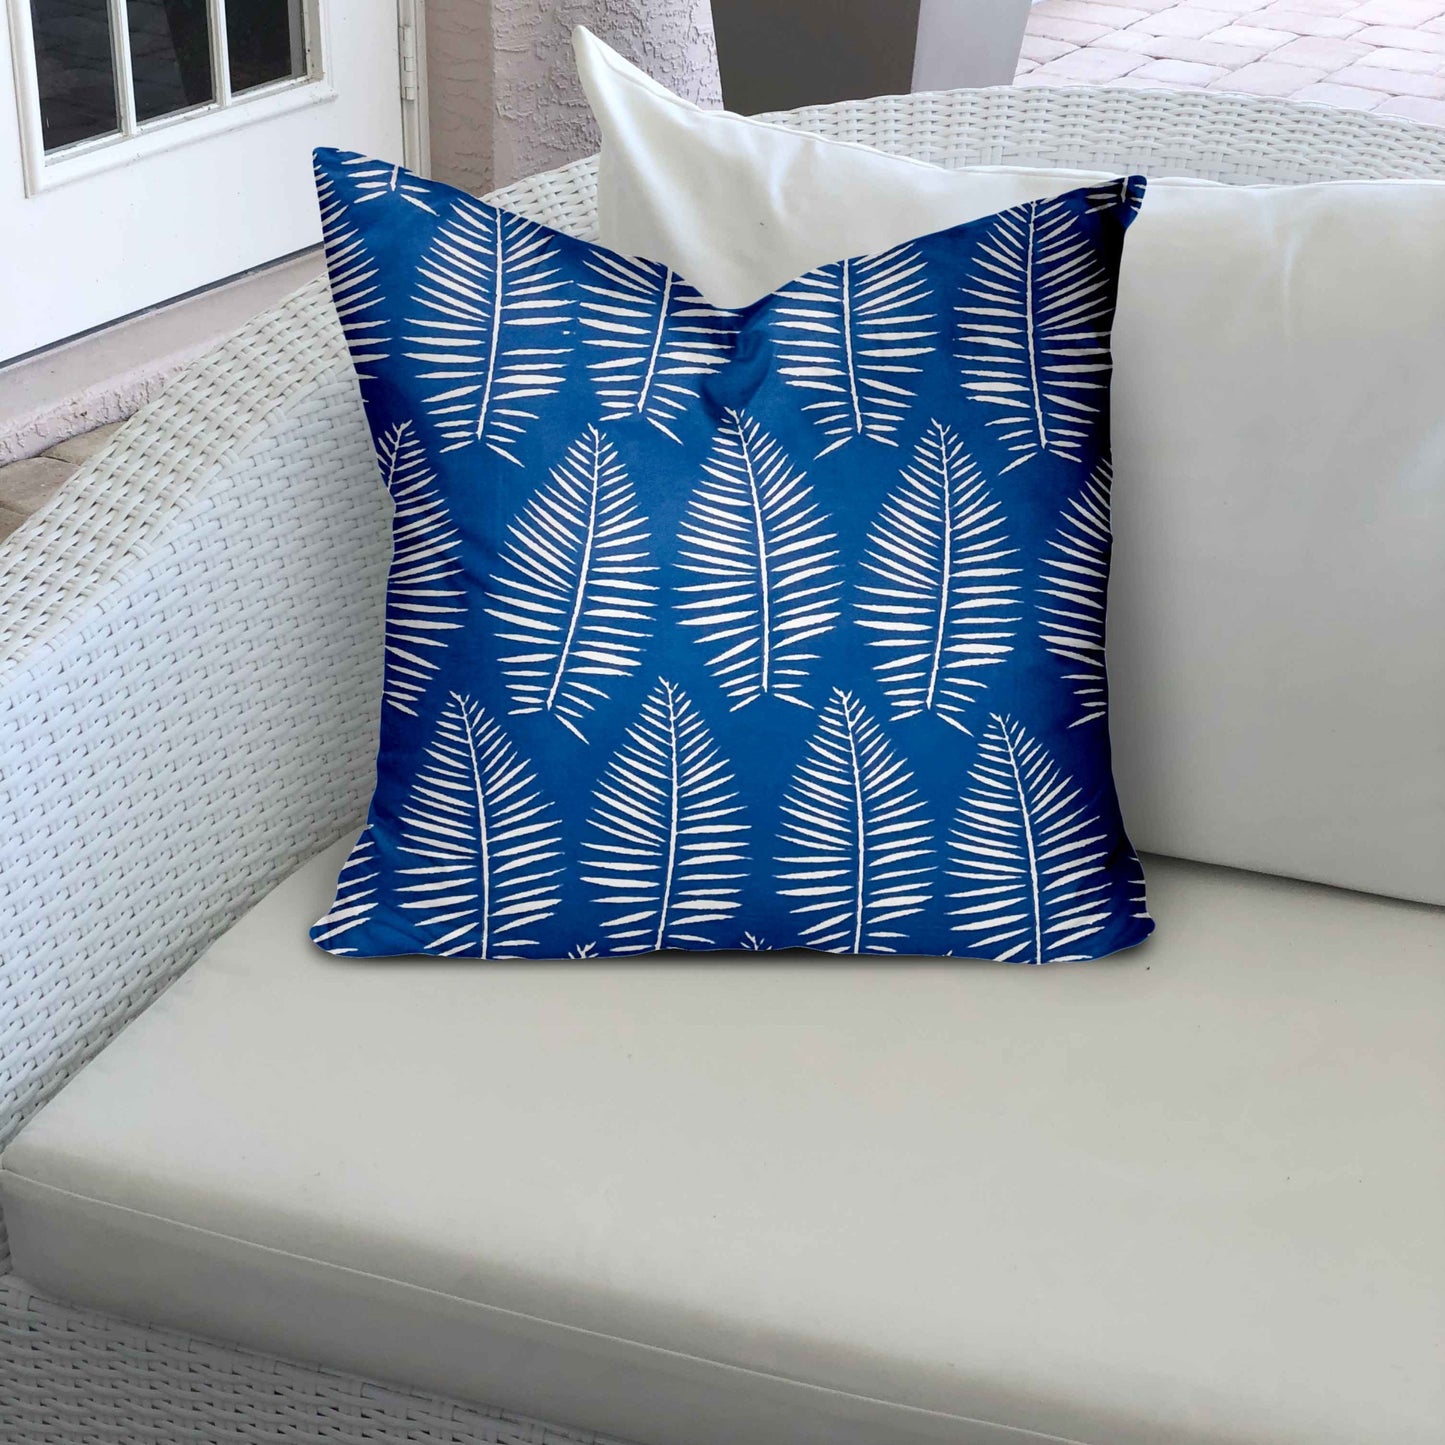 20" X 20" Blue And White Zippered Tropical Throw Indoor Outdoor Pillow